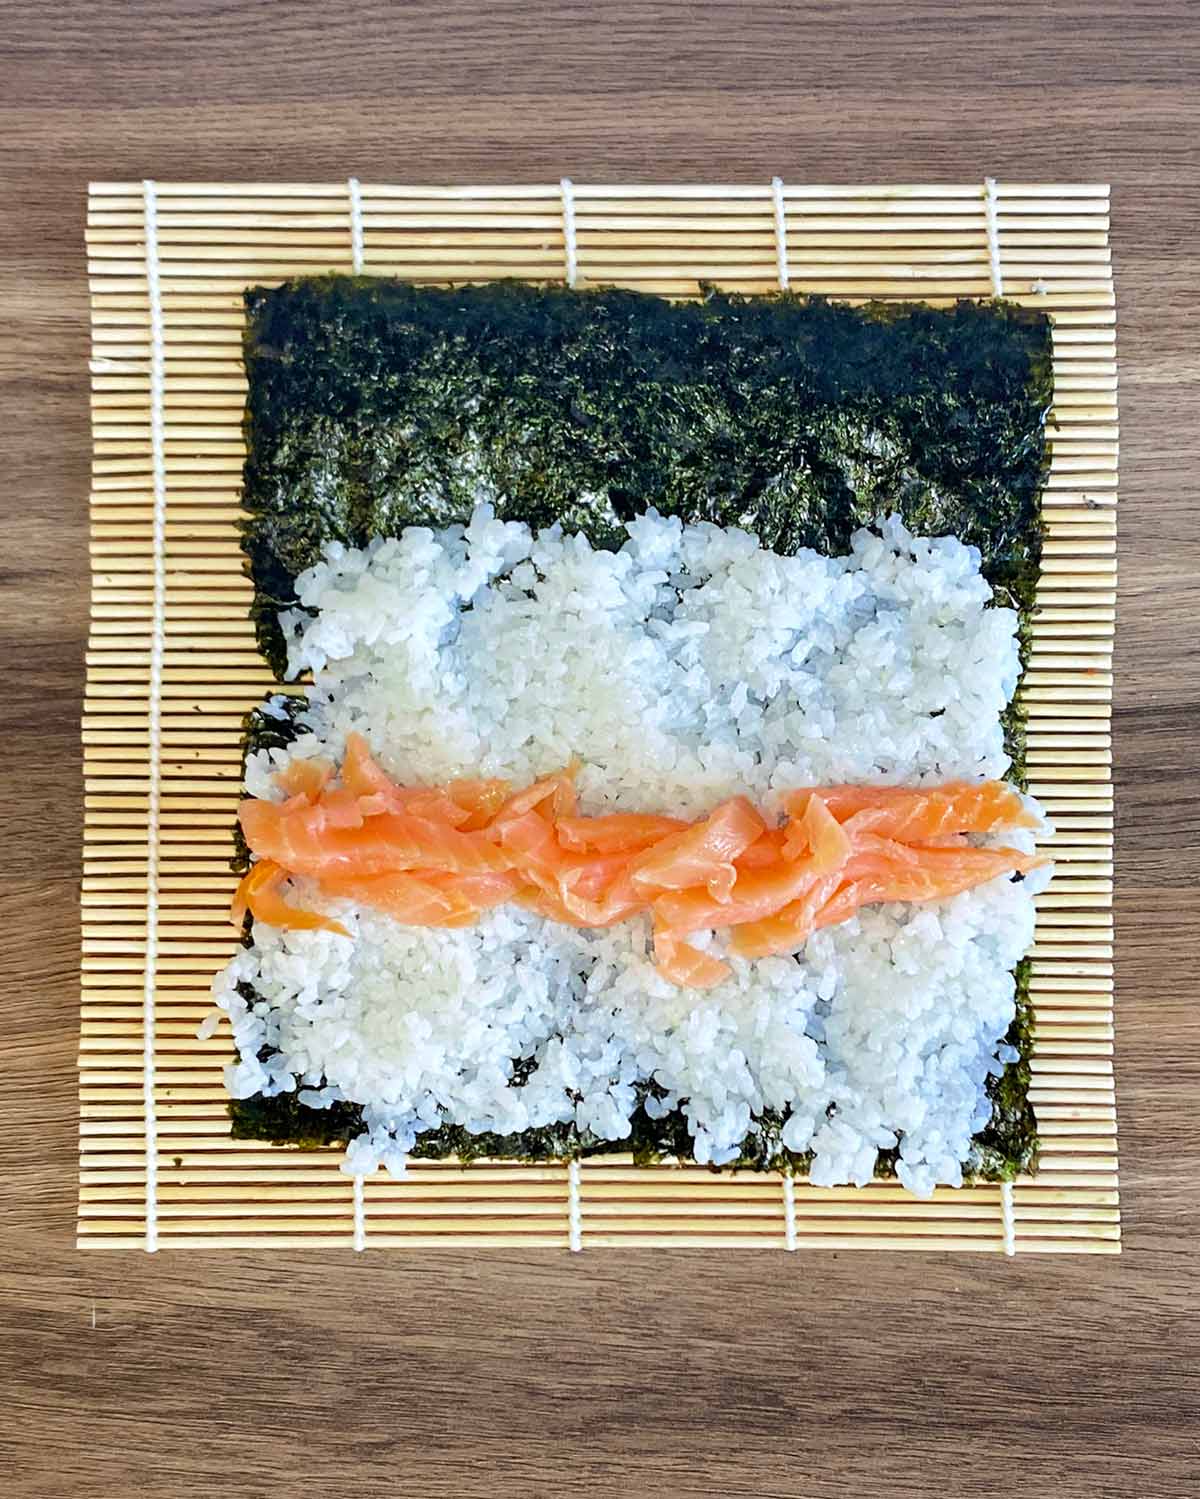 Smoked salmon laid across the centre of the rice.